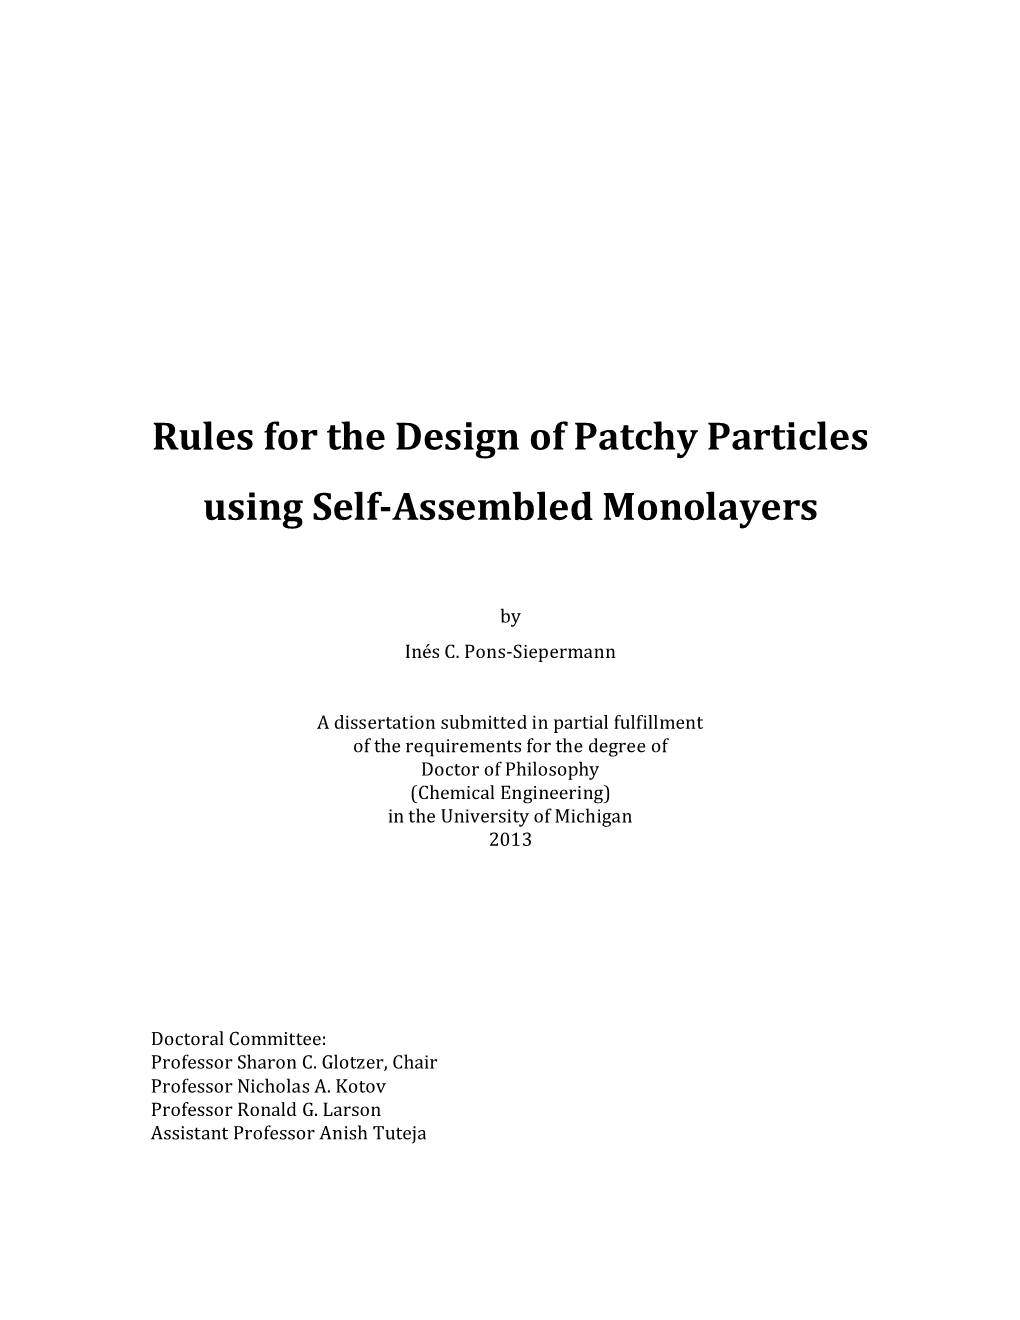 Rules for the Design of Patchy Particles Using Self-Assembled Monolayers